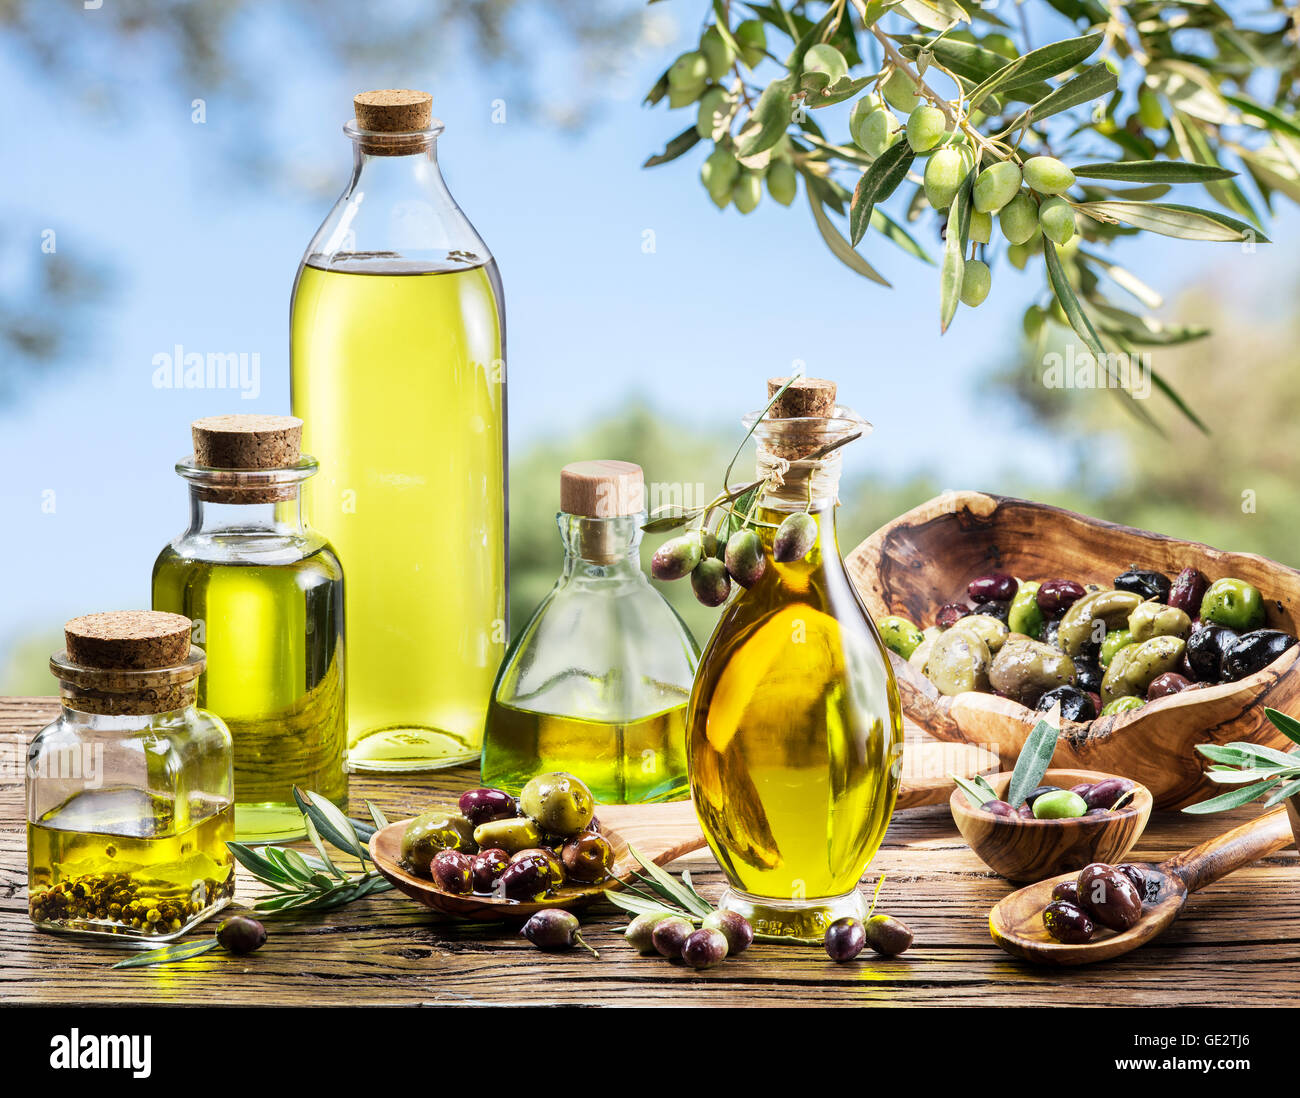 Bottles of olive oil on the old wooden table under olive tree. Blue sky on the background. Stock Photo